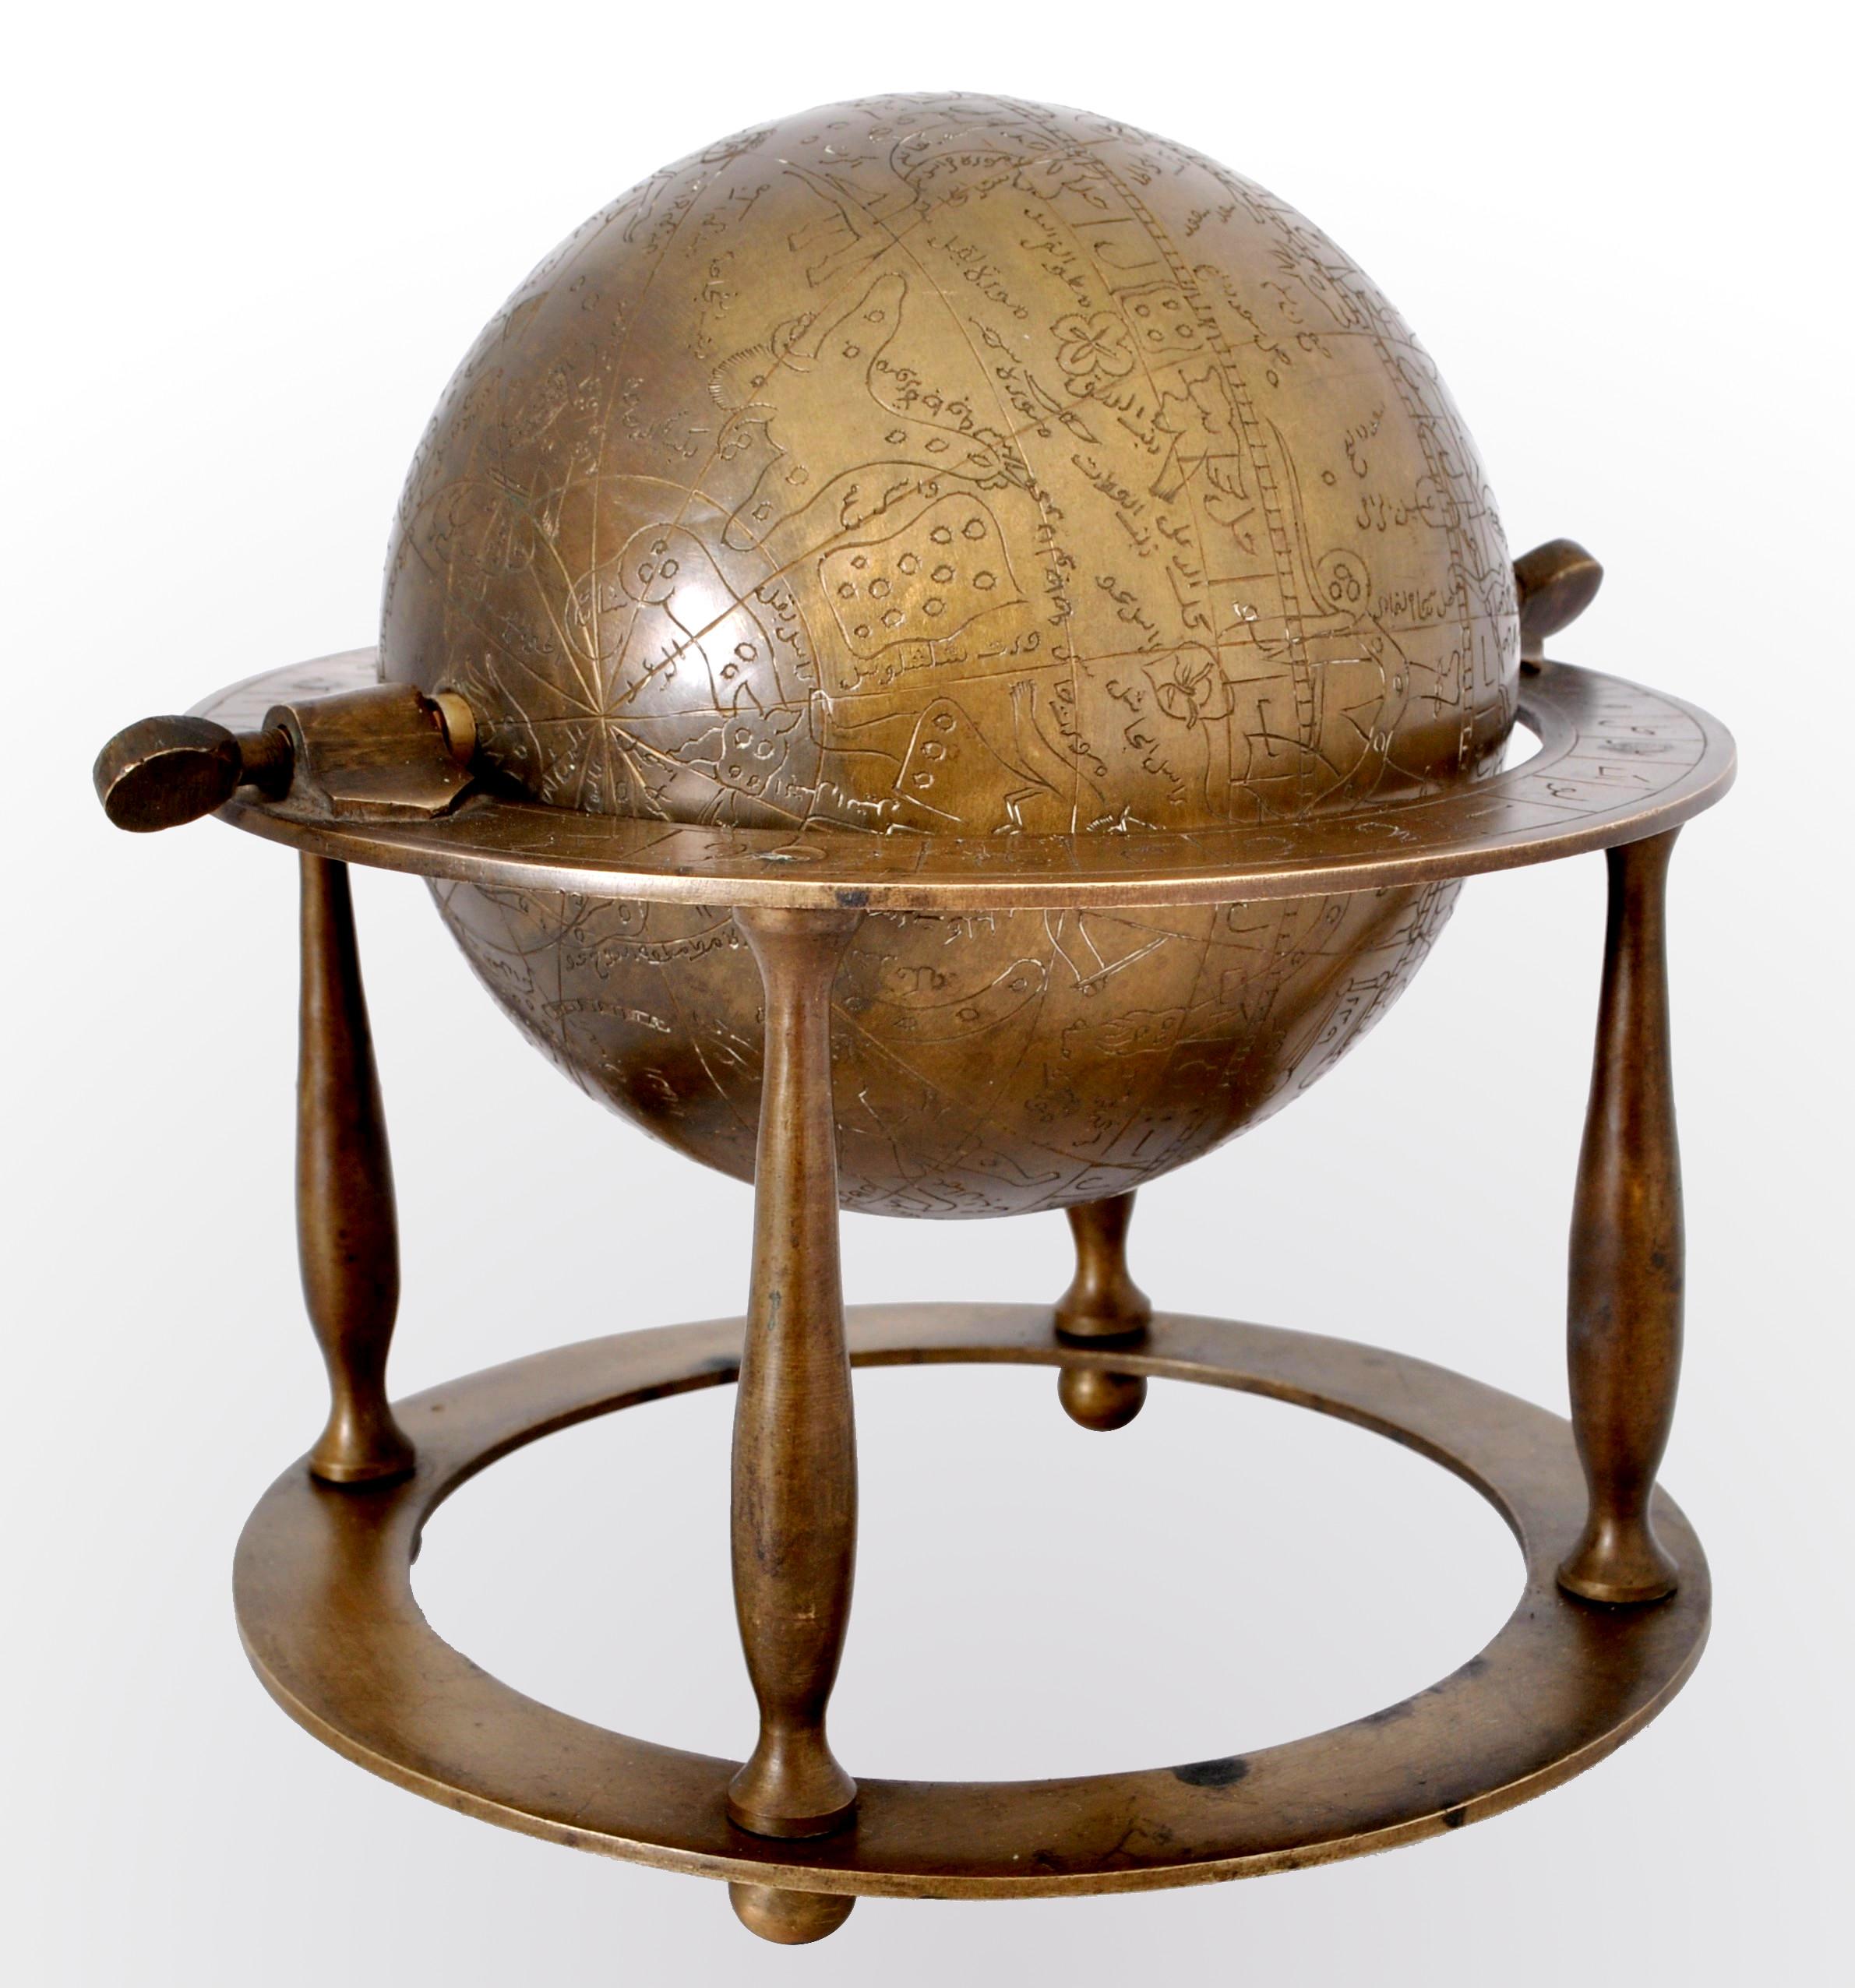 A good antique Islamic Qajar period bronze Persian Arabic armillary (spherical astrolabe), celestial globe, circa 1850. The globe having a graduated ring & standing on four blustered legs, the hollow sphere mounted on an axle & is ornately engraved